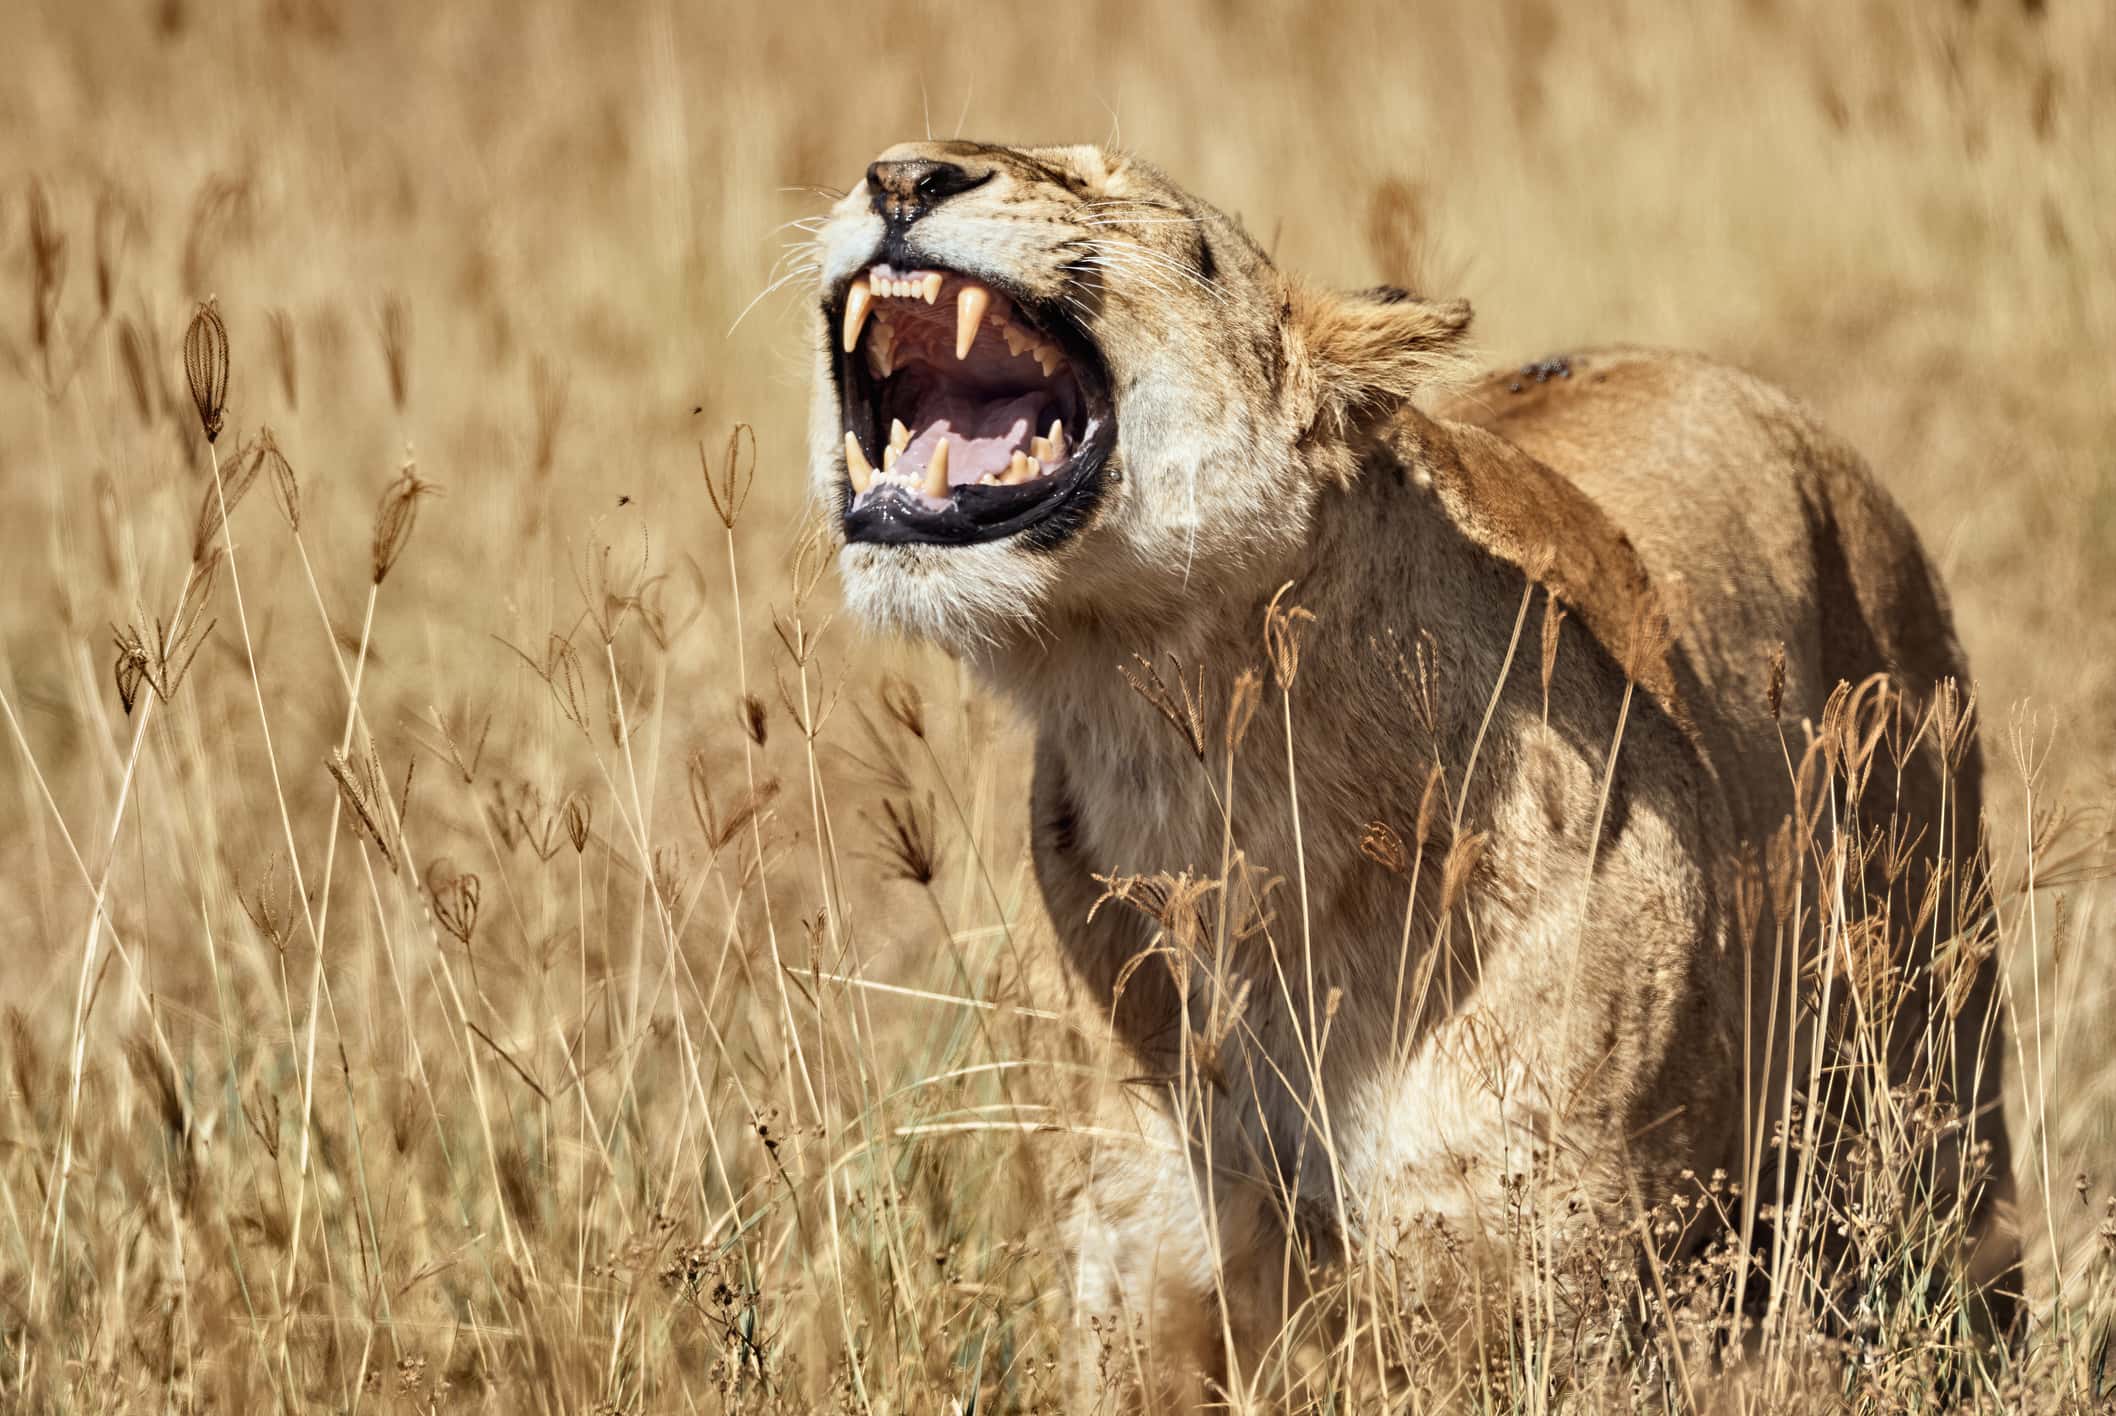 Lioness roars in the savannah